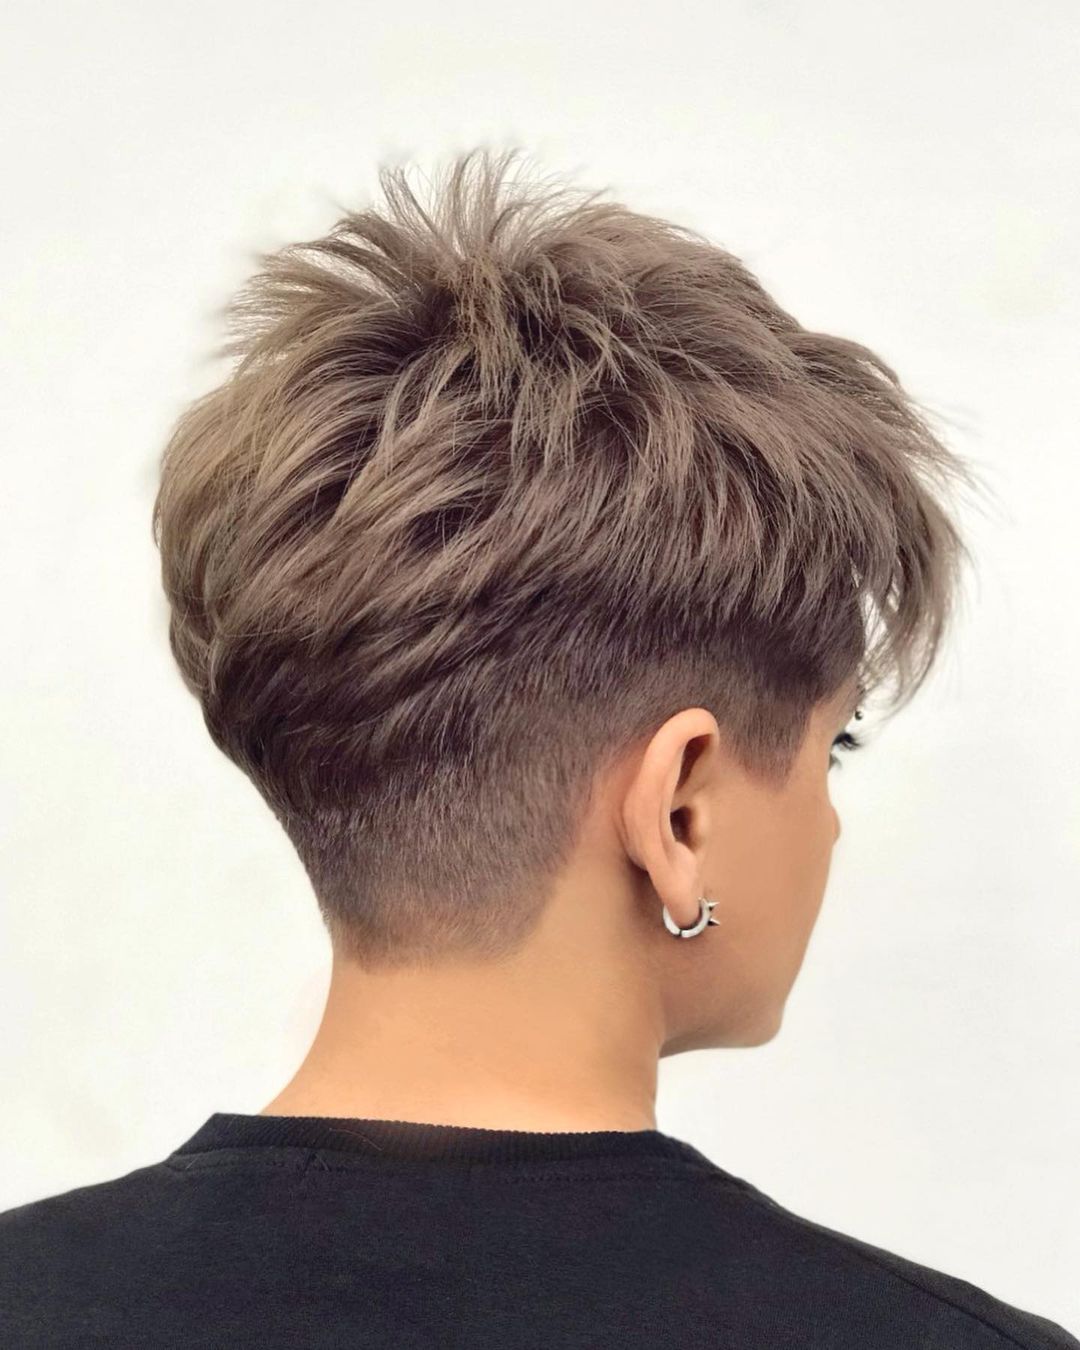 Short Layered Hairstyles for Thick Hair - Women Short Haircut Designs